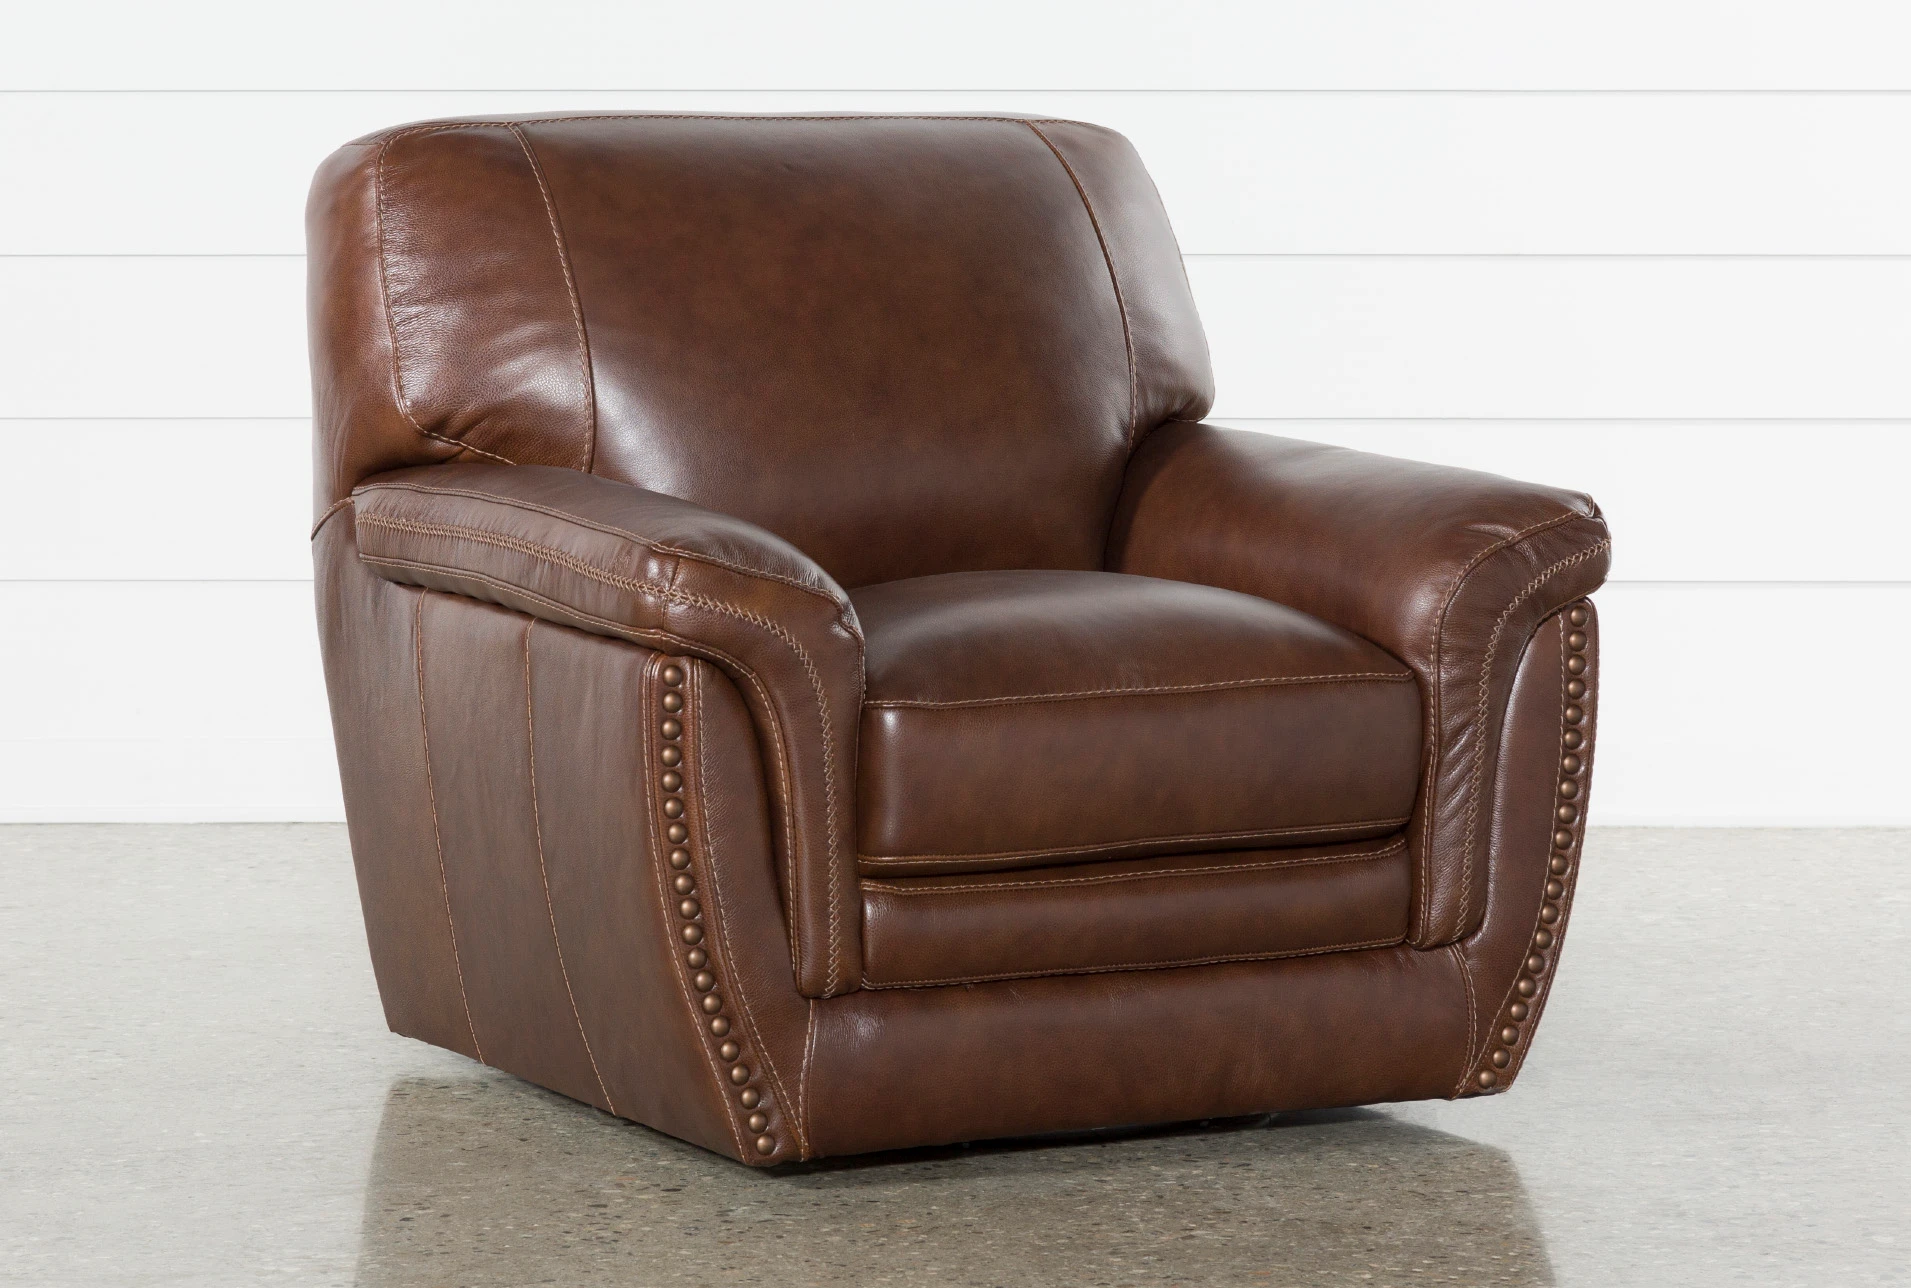 244440 Brown Leather Chair Signature 01 ?w=1911&h=1288&mode=pad